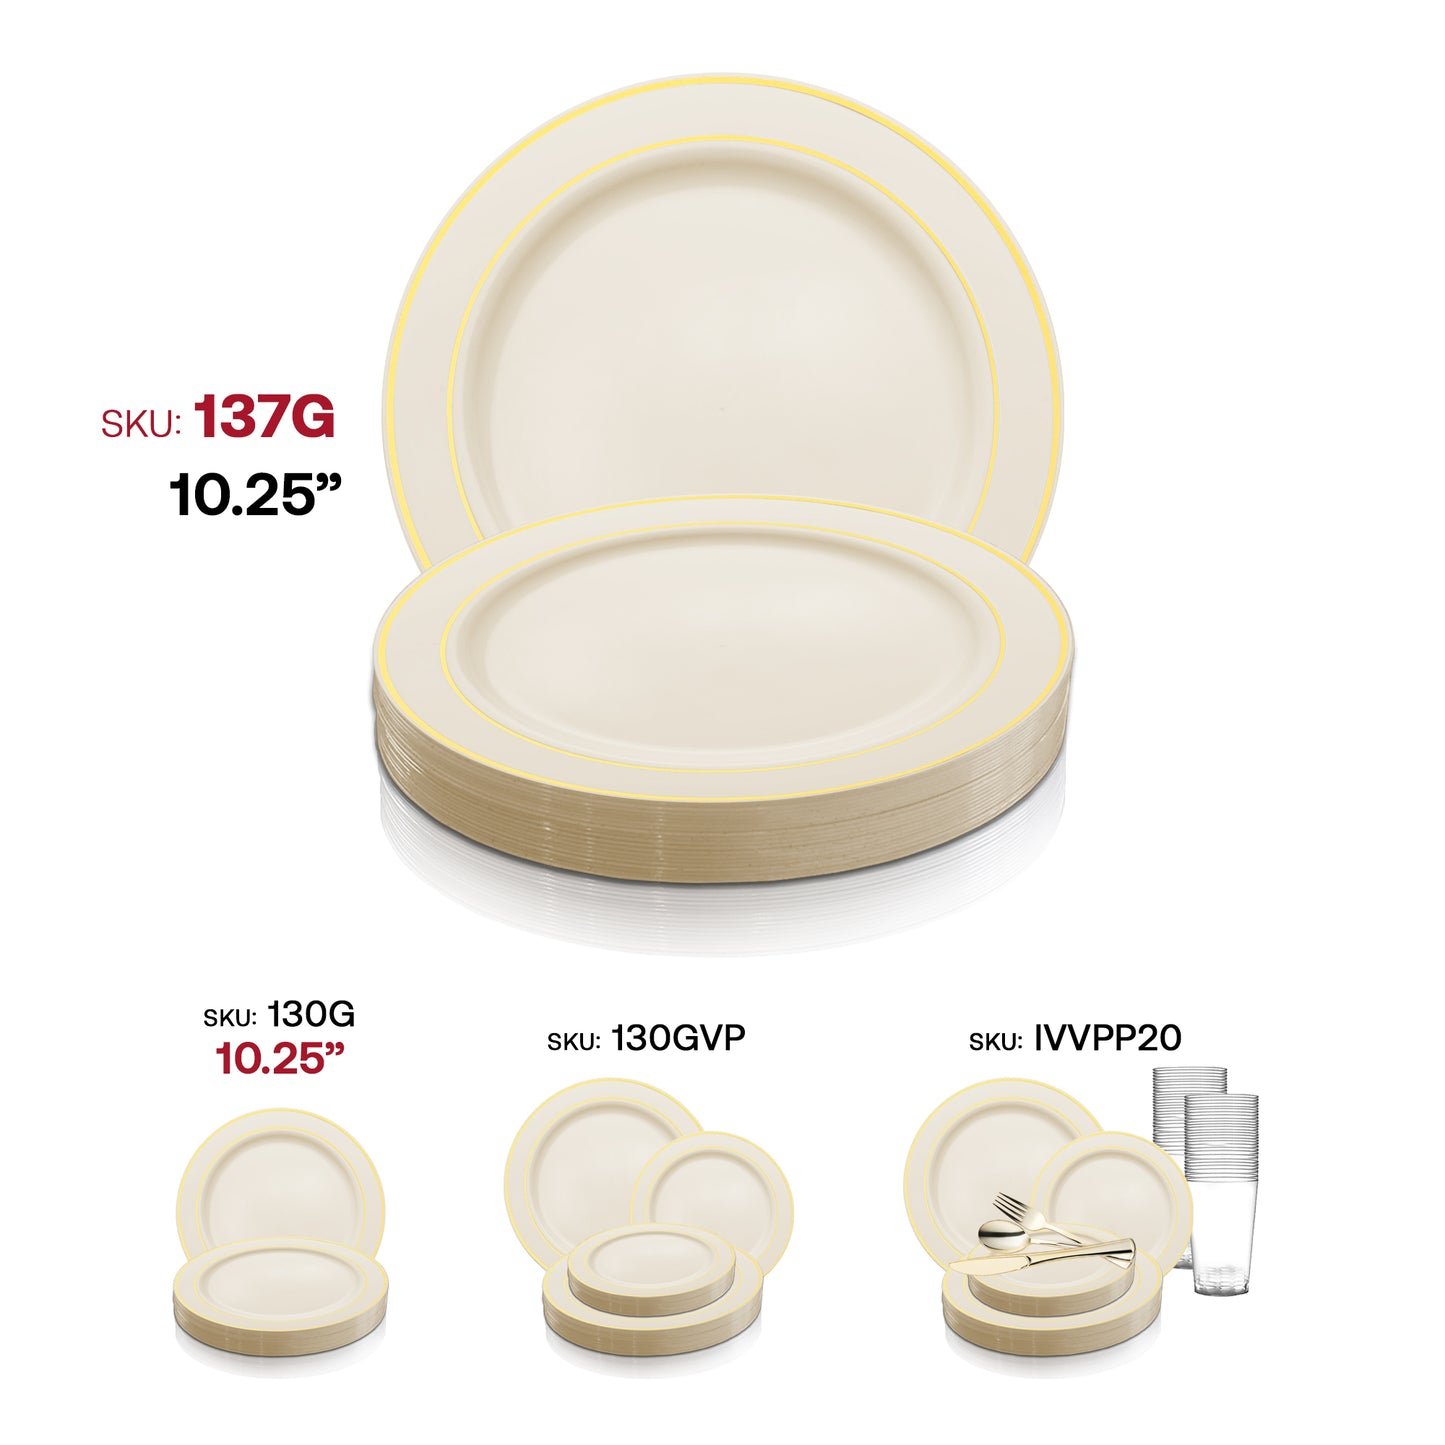 Ivory with Gold Edge Rim Plastic Appetizer/Salad Plates (7.5") SKU | The Kaya Collection